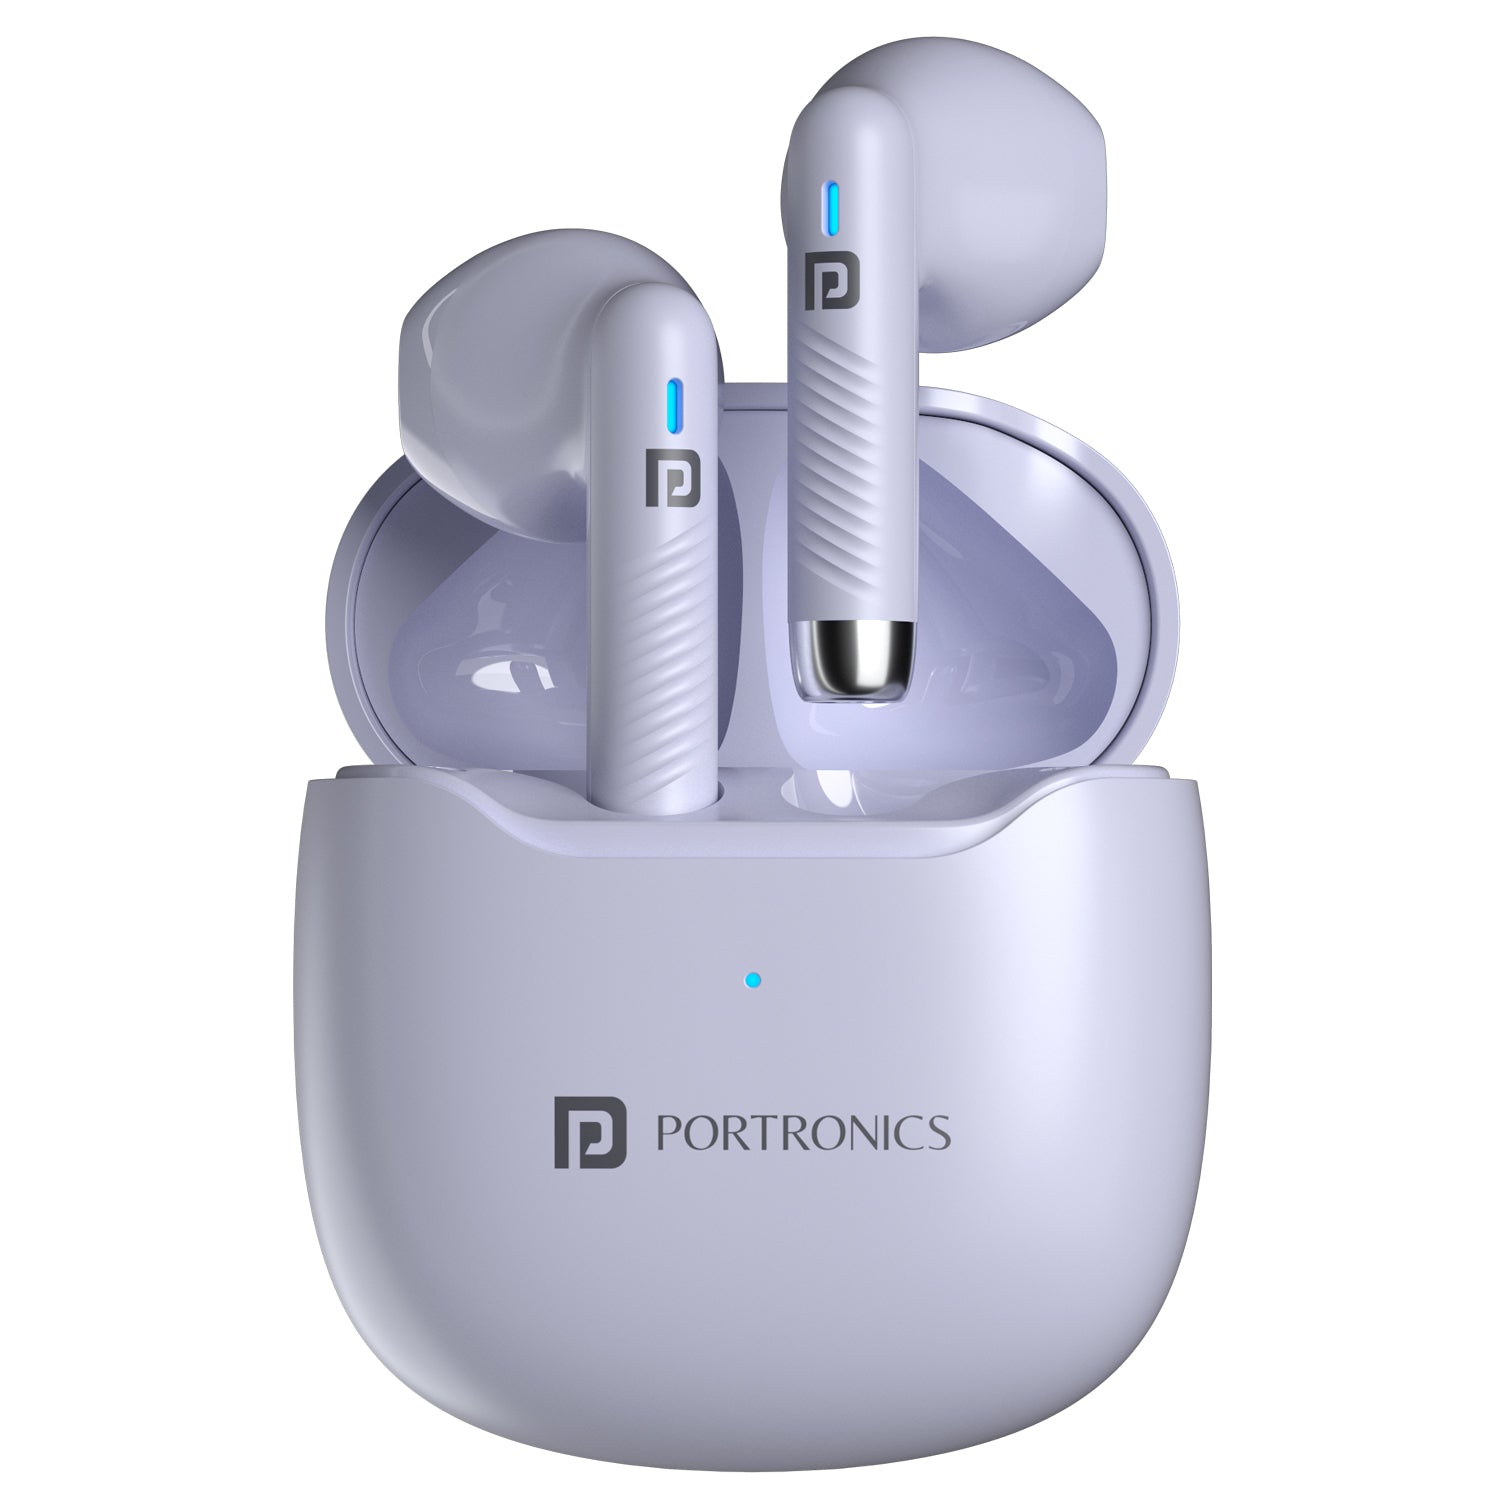 Portronics Harmonics Twins s12 Smart wireless TWS earbuds| earbuds with noise cancelling online| Bluetooth earbuds with mic| best earbuds| latest earbuds under 1500